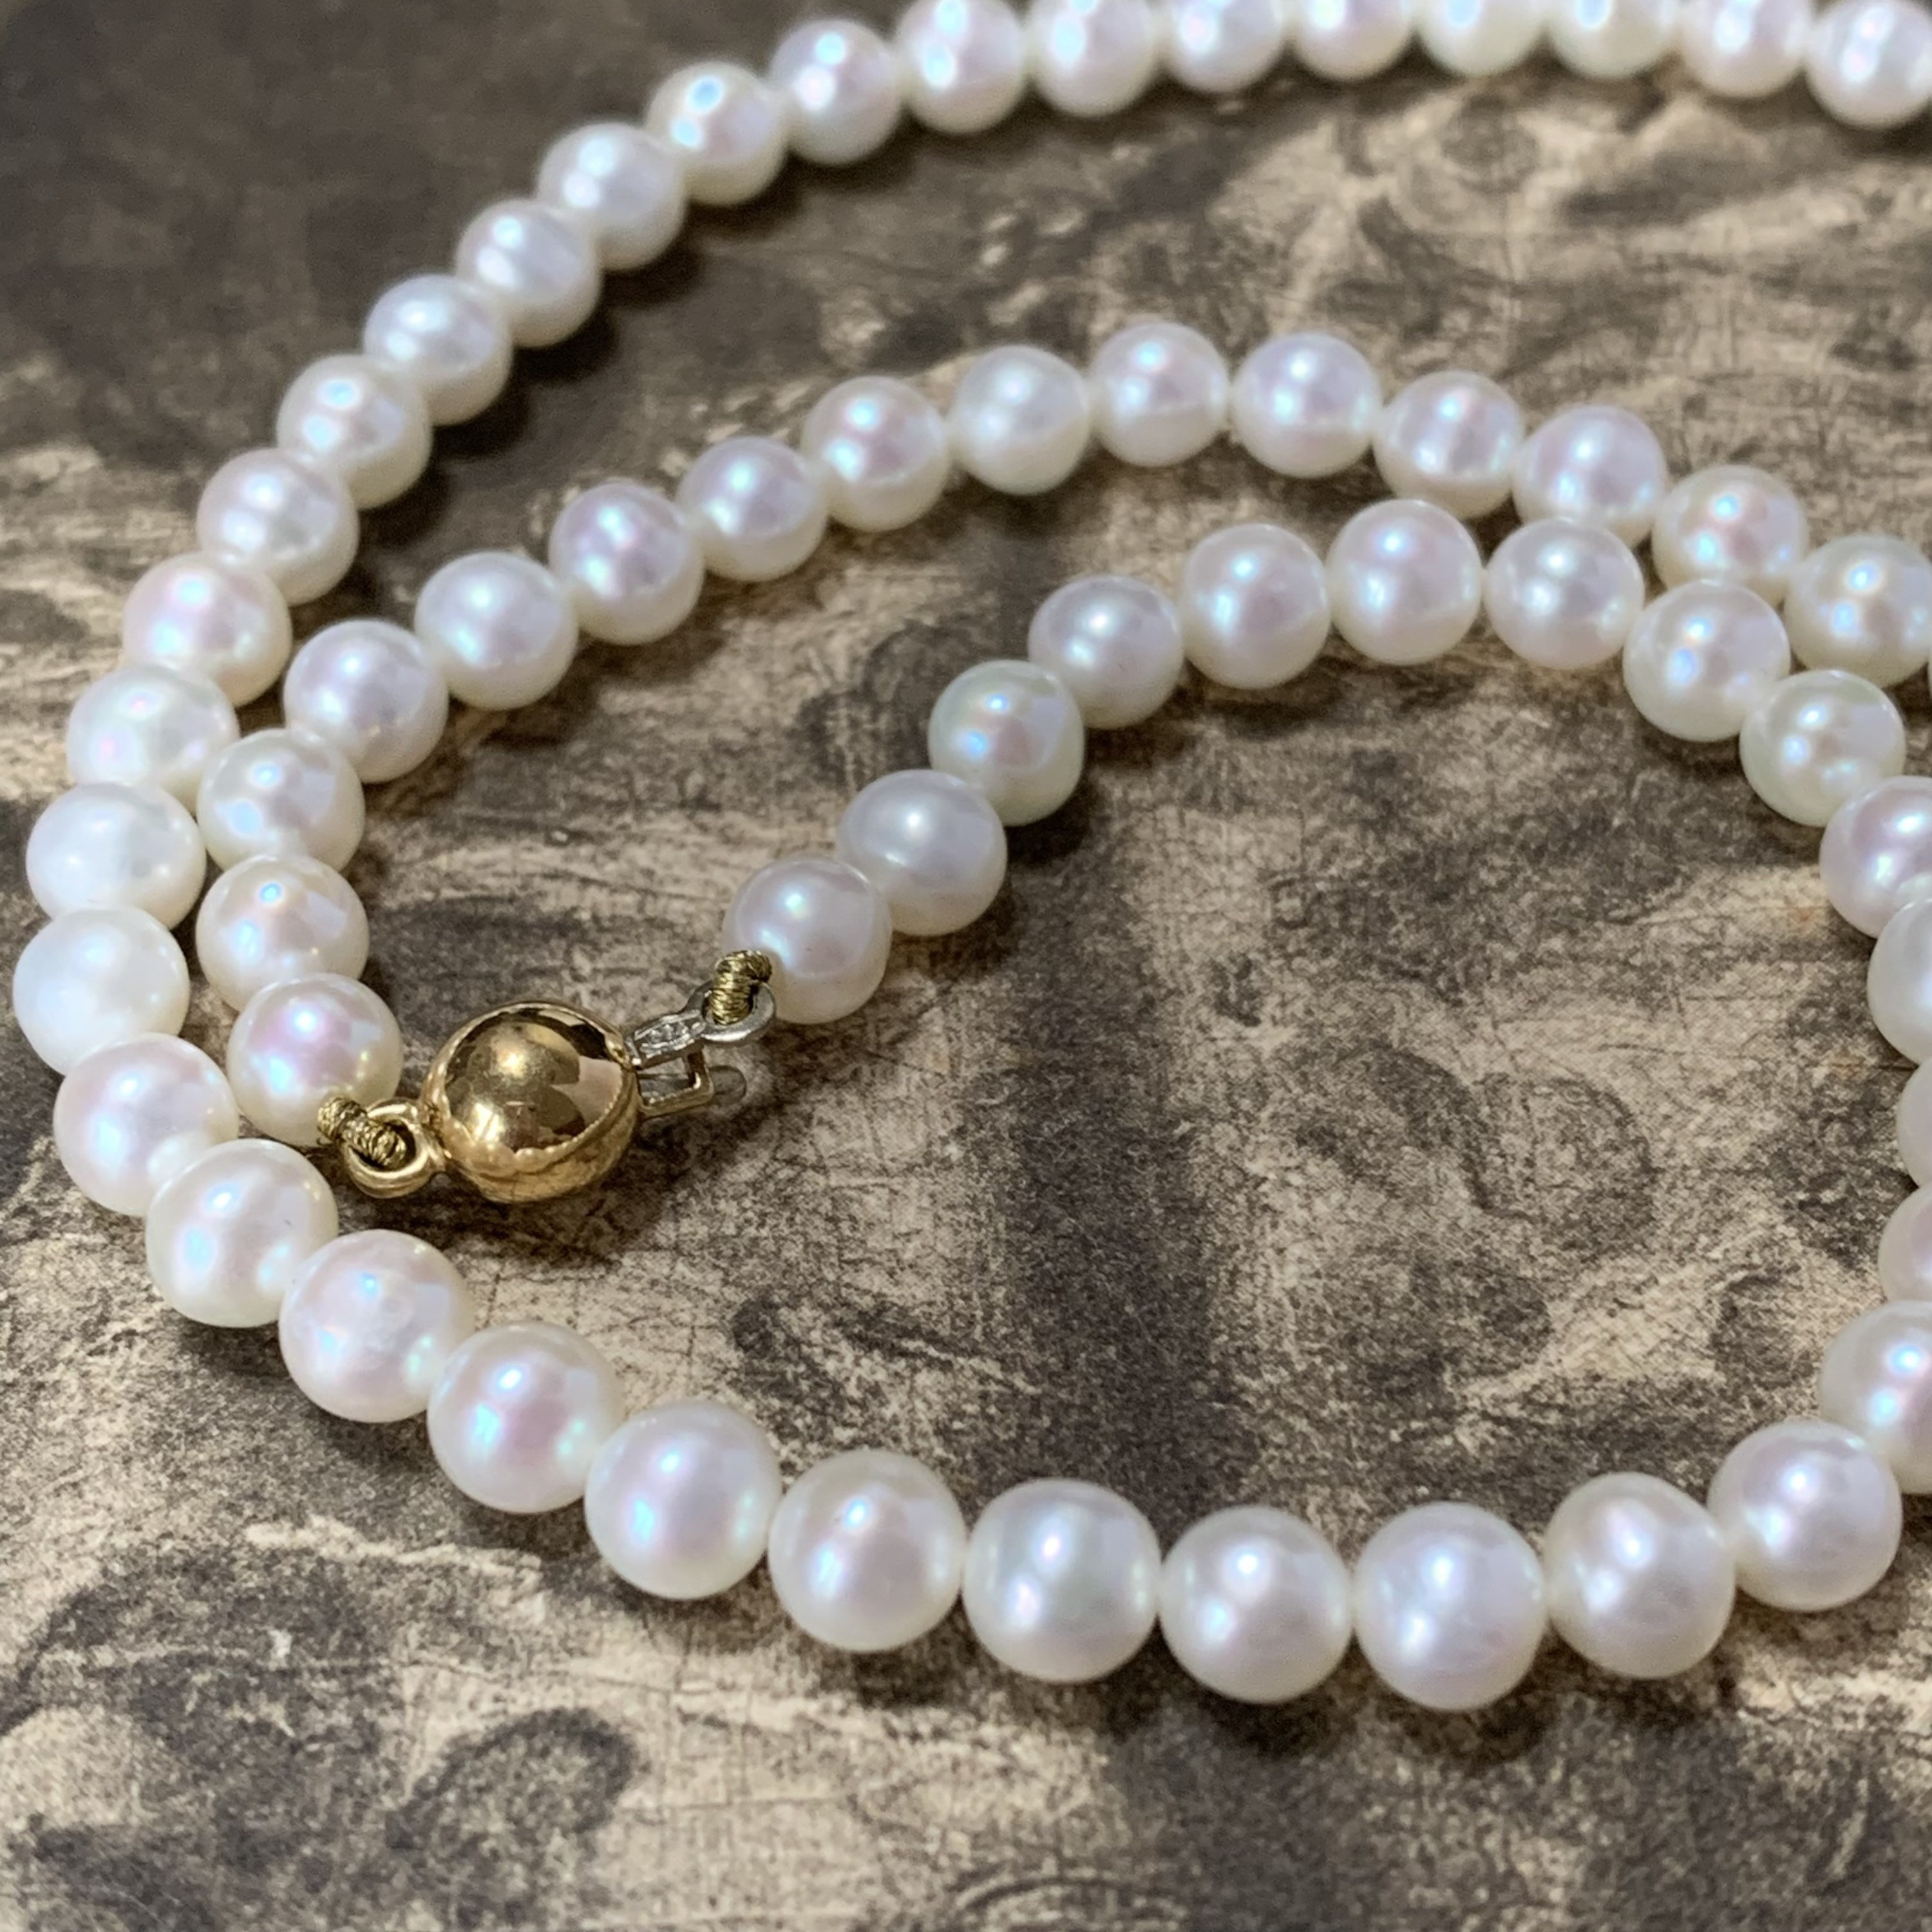 Pearl Necklace For Brides Or Bridesmaids With 18Ct Gold Clasp Hallmark 5mm Akoya Pearls & 41cm Long